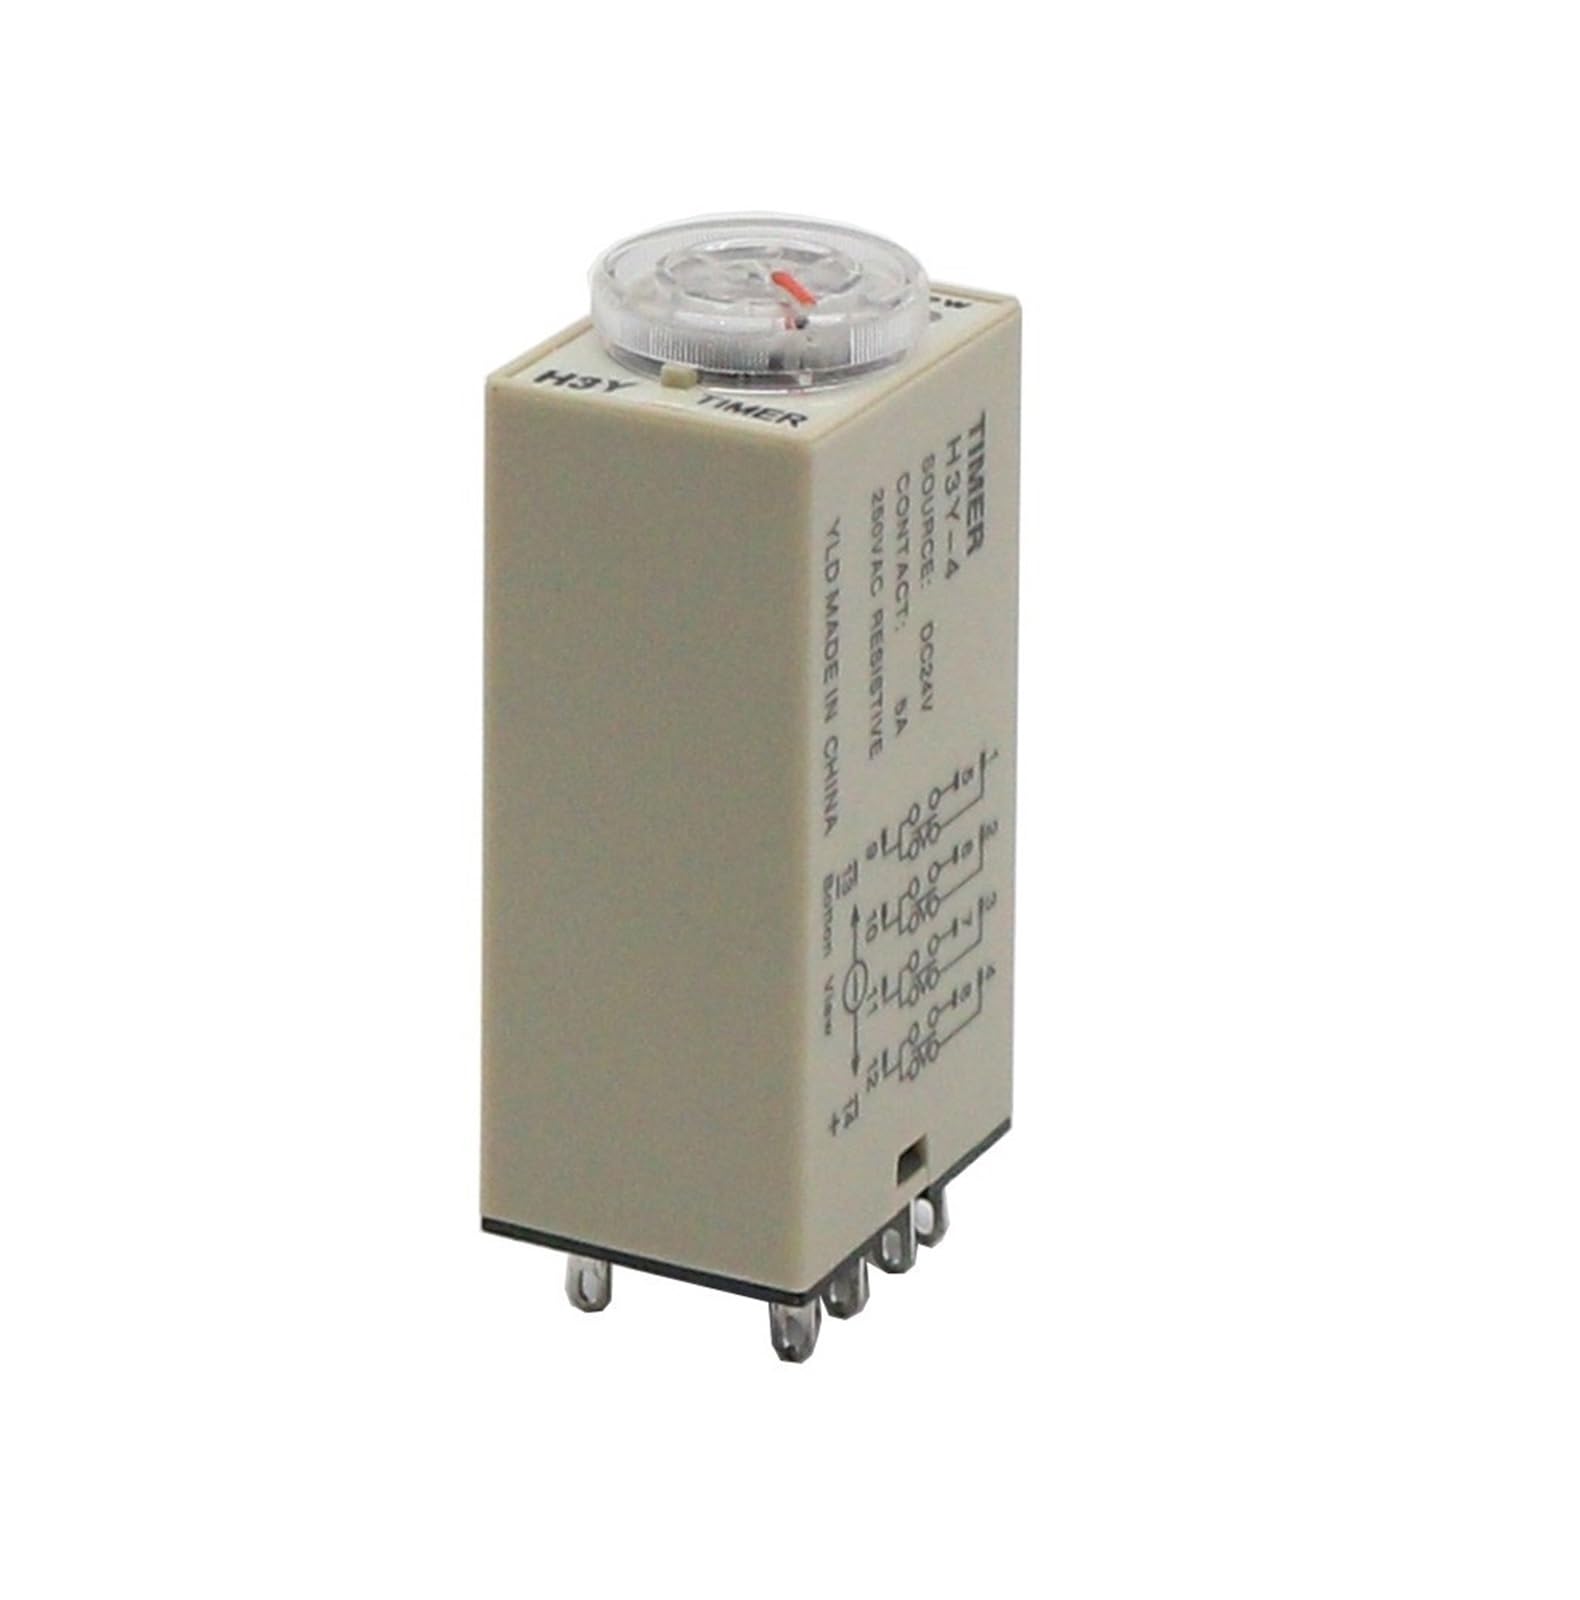 1pcs Power on Delay Time Relay H3Y-4 Small 14-pinDC12V24vAC220v Timer Switch 1S 3S 5S 30S 60S 5M 10M 30M 60M NWPNLXEA(DC 24V,H3Y-4 60Minute) von NWPNLXEA